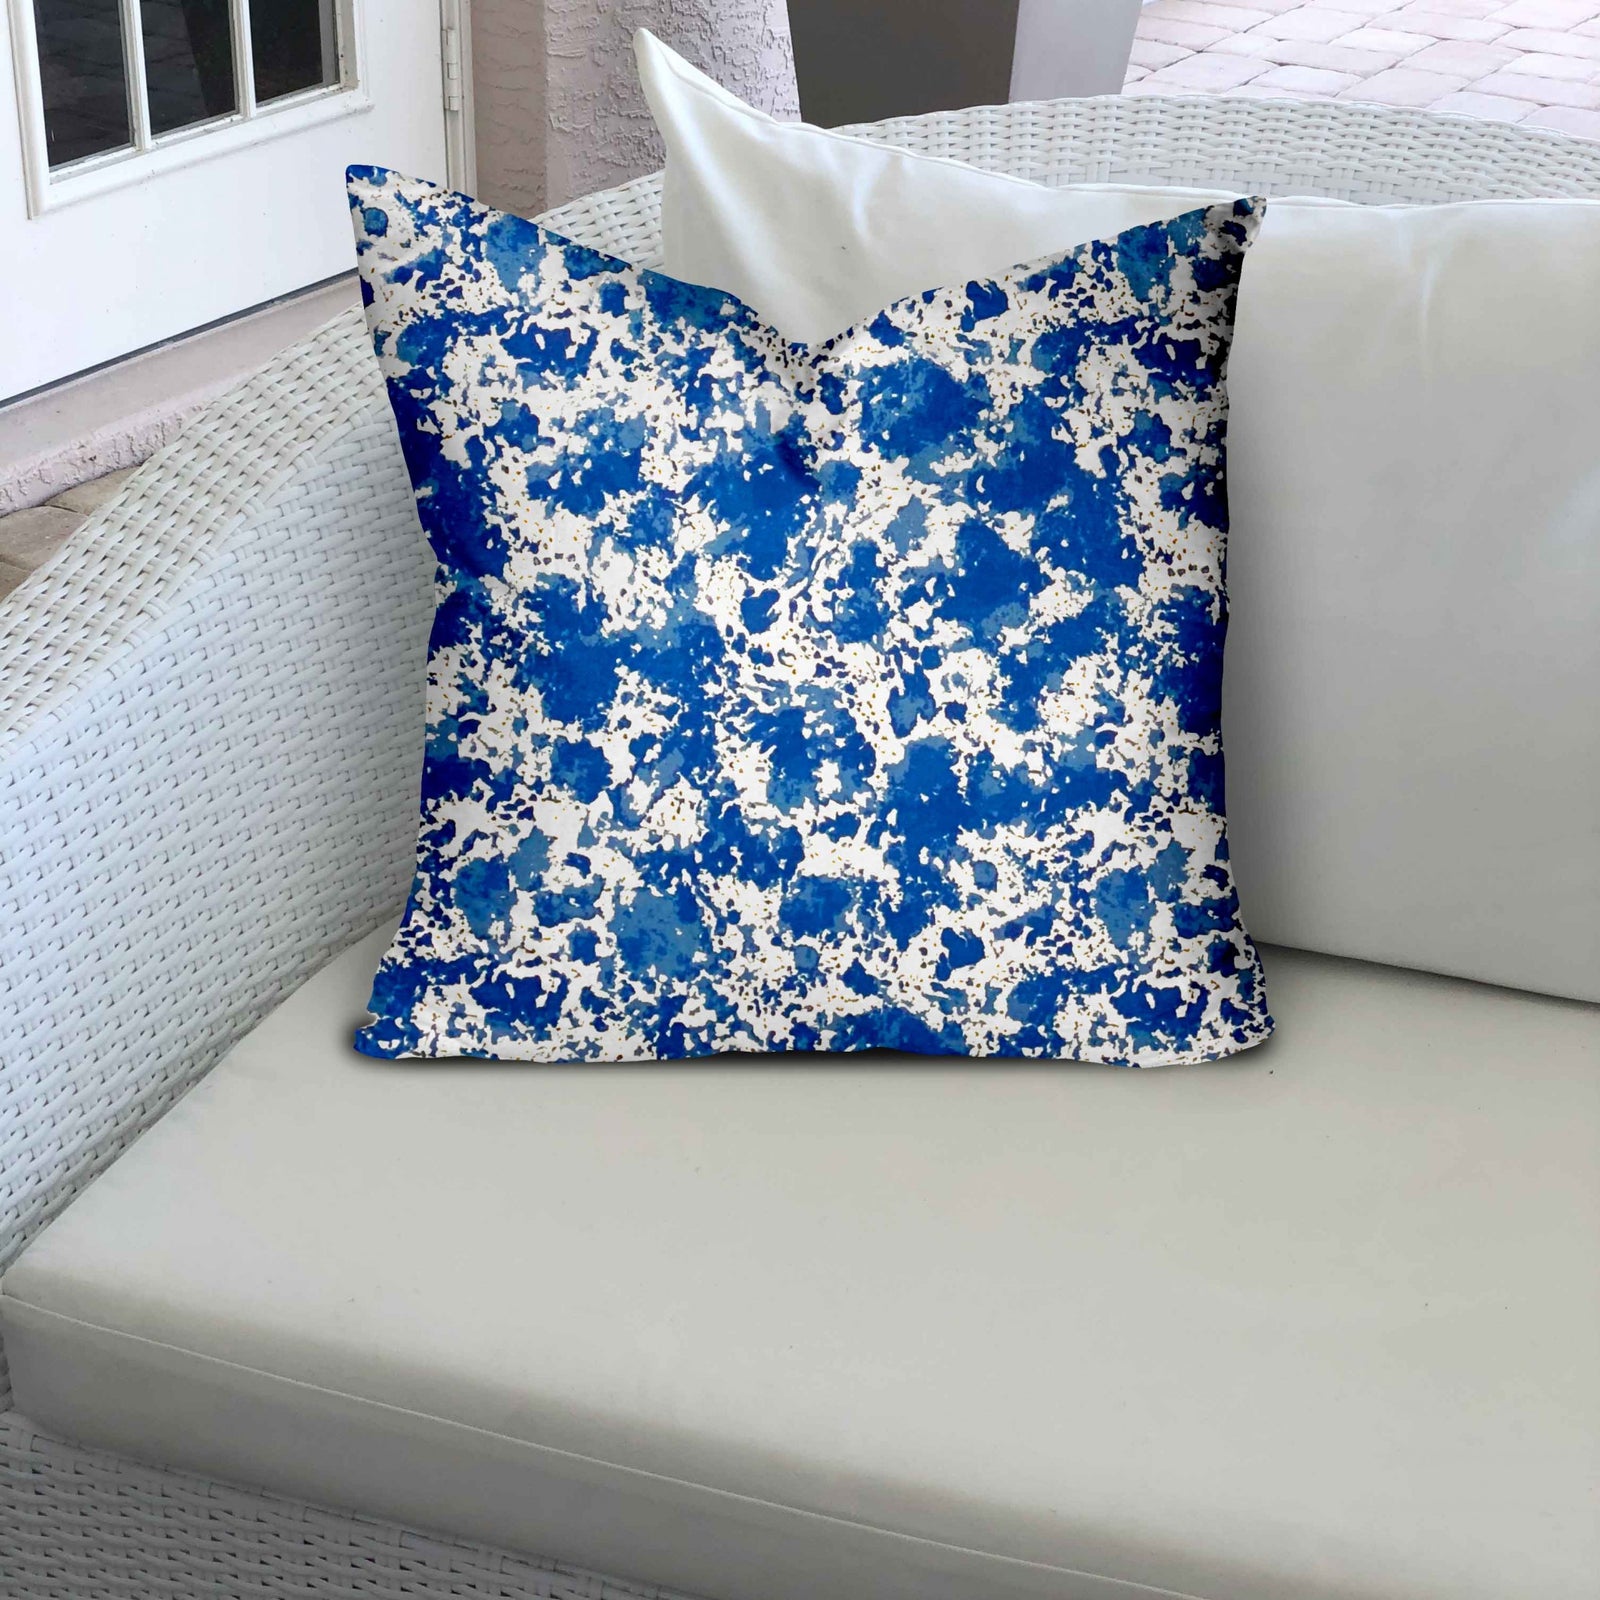 12" X 12" Blue And White Zippered Coastal Throw Indoor Outdoor Pillow